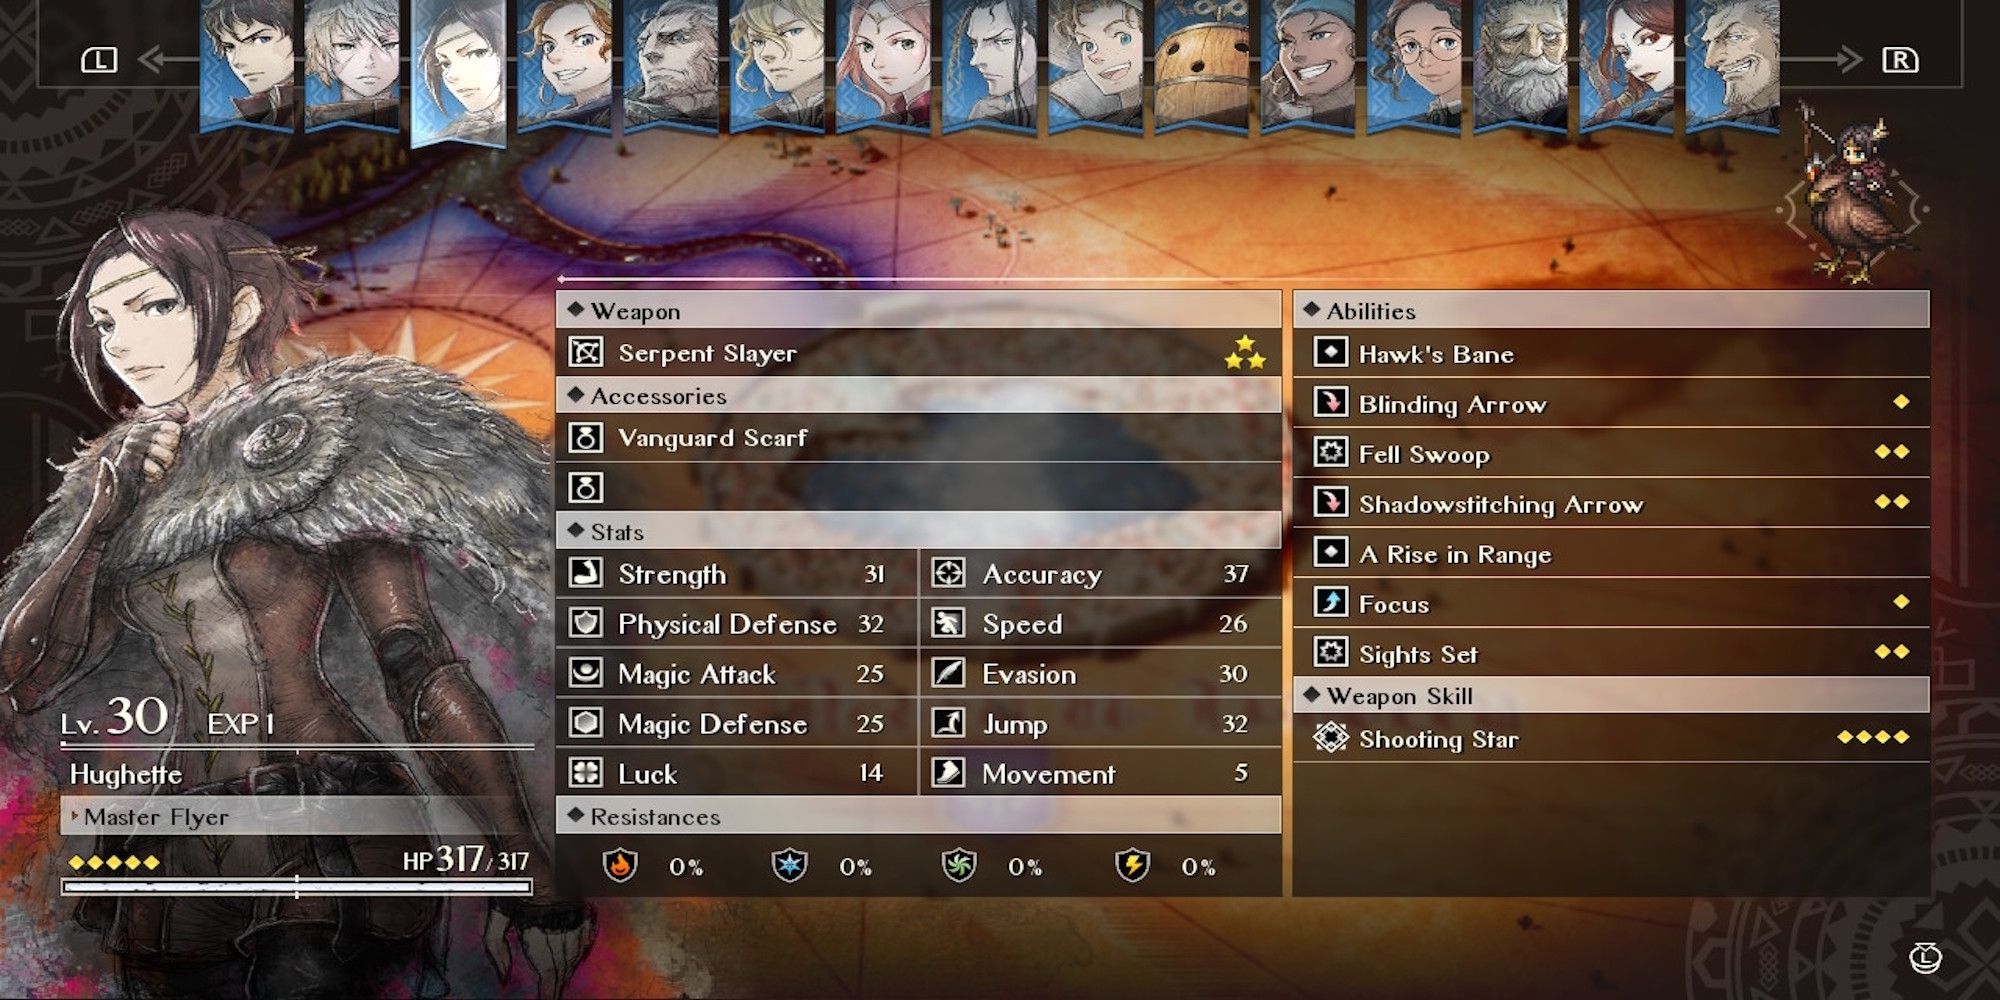 Hughette in the roster menu from Triangle Strategy